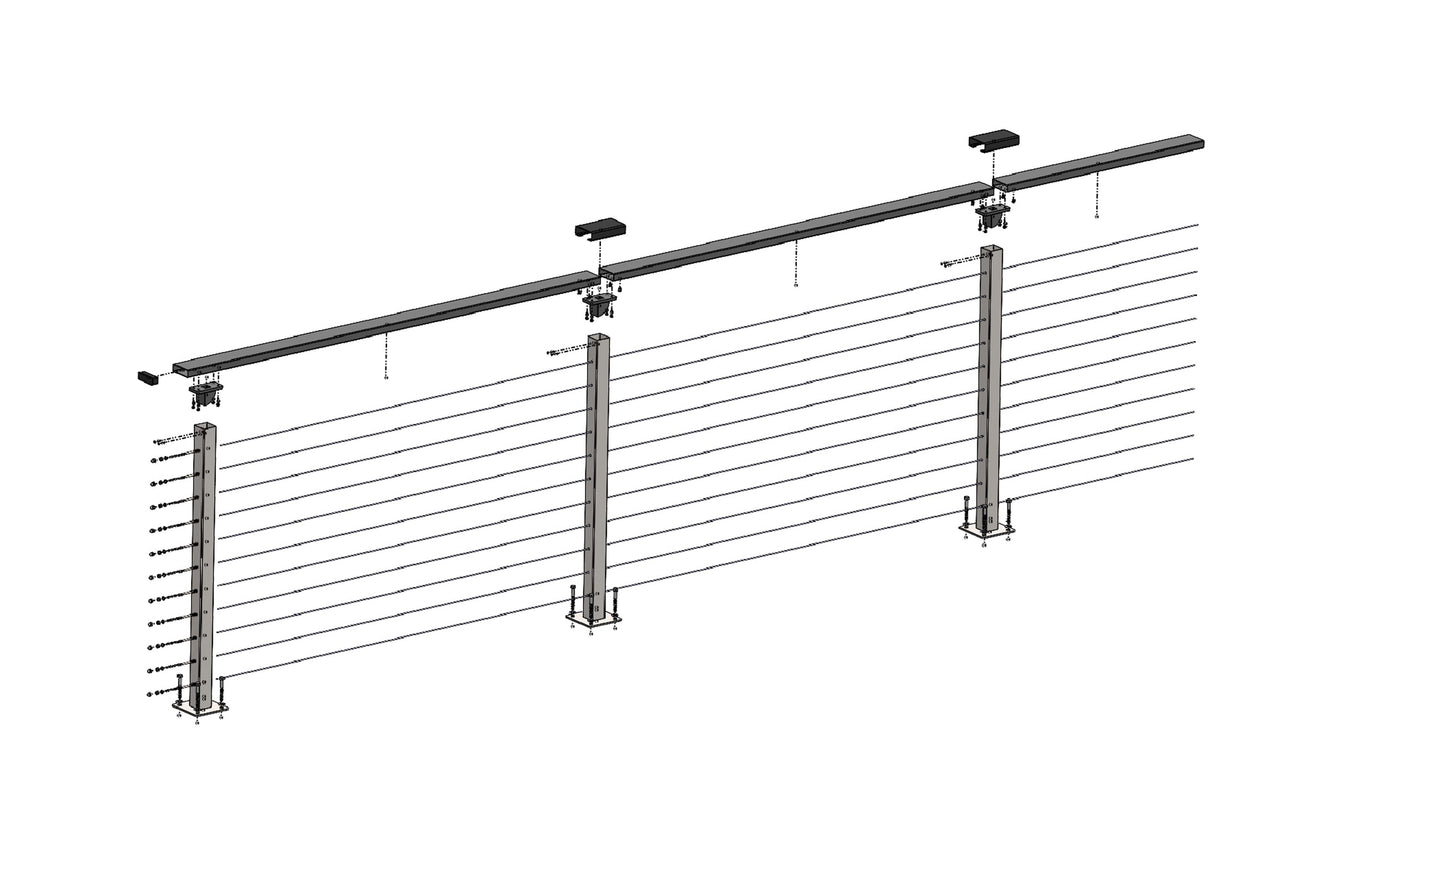 26 ft. x 42 in. Black Deck Cable Railing, Base Mount , Stainless